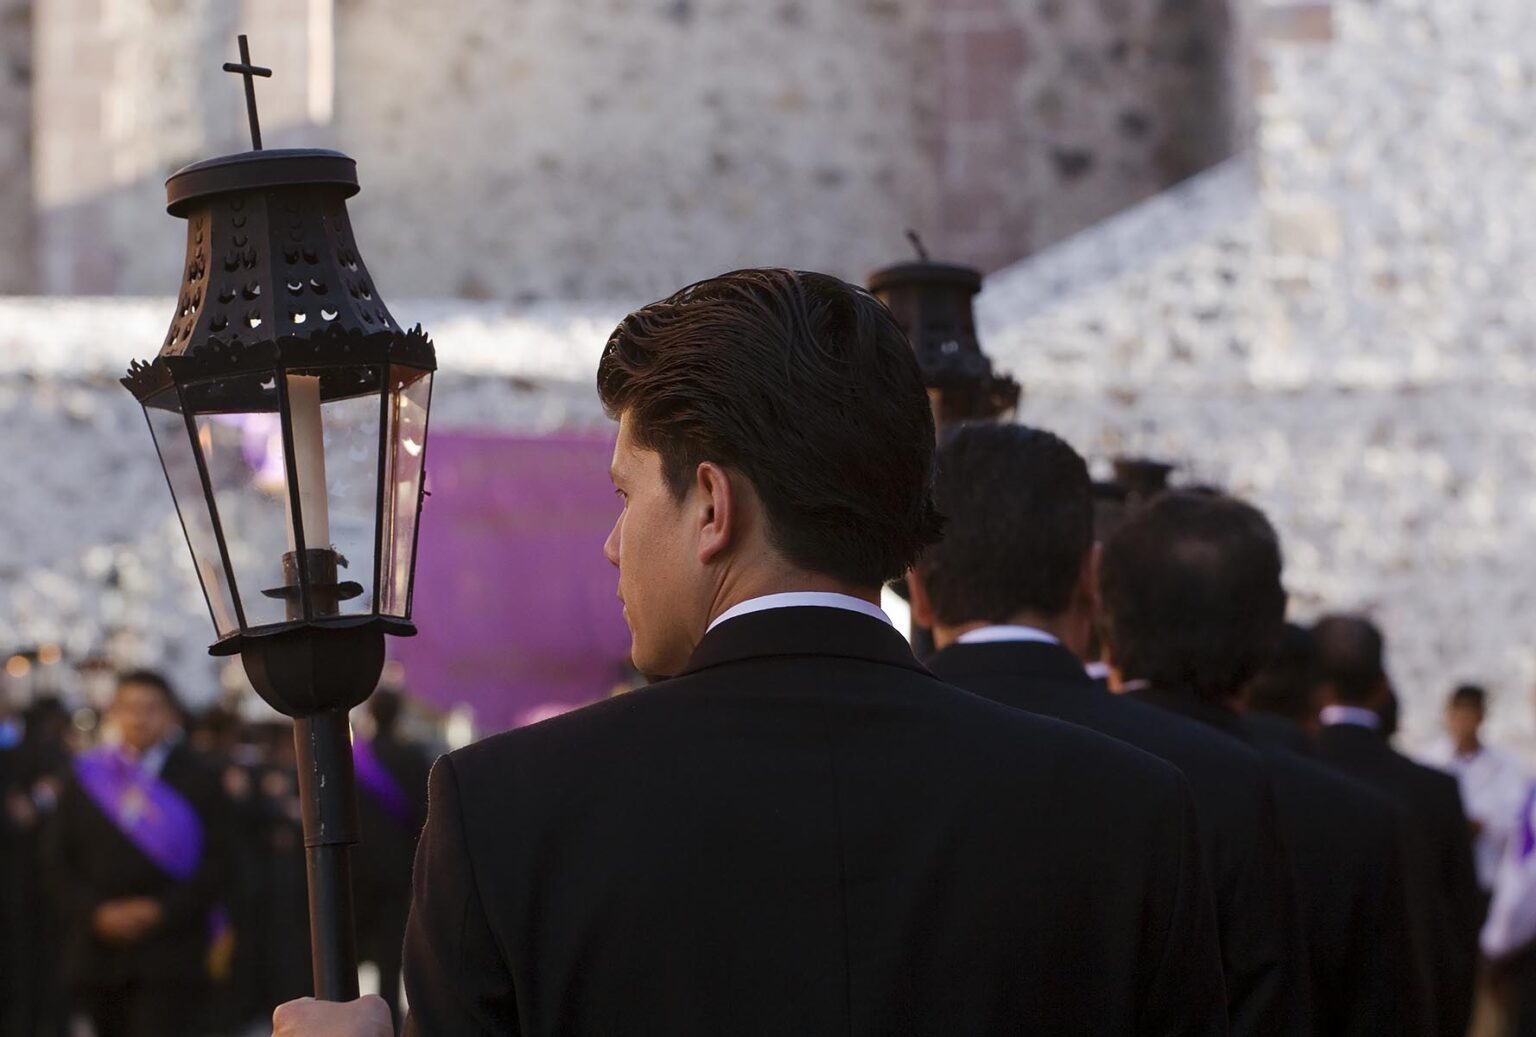 MEXICAN MAN with lantern during the EASTER PROCESSION - SAN MIGUEL DE ALLENDE, MEXICO